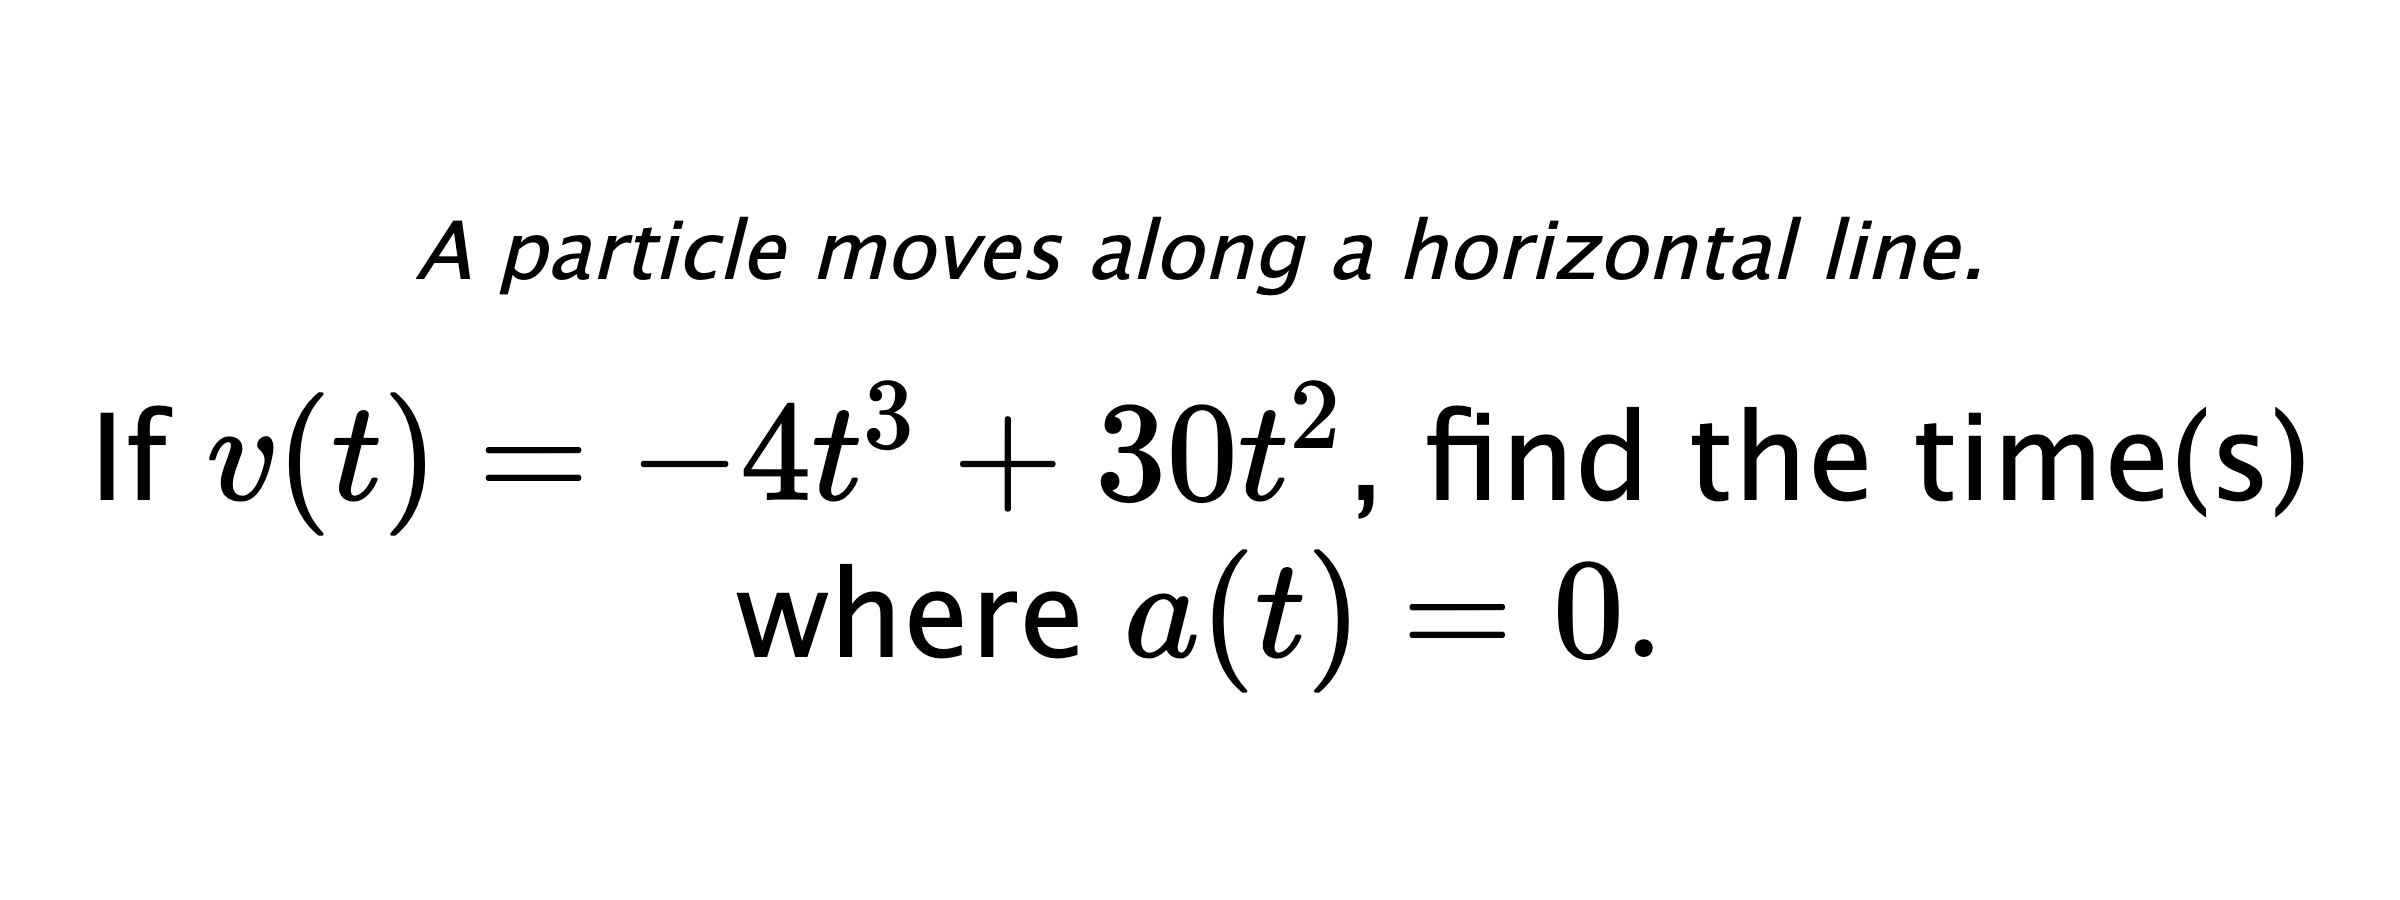 A particle moves along a horizontal line. If $ v(t)=-4t^3+30t^2 $, find the time(s) where $ a(t)=0 .$